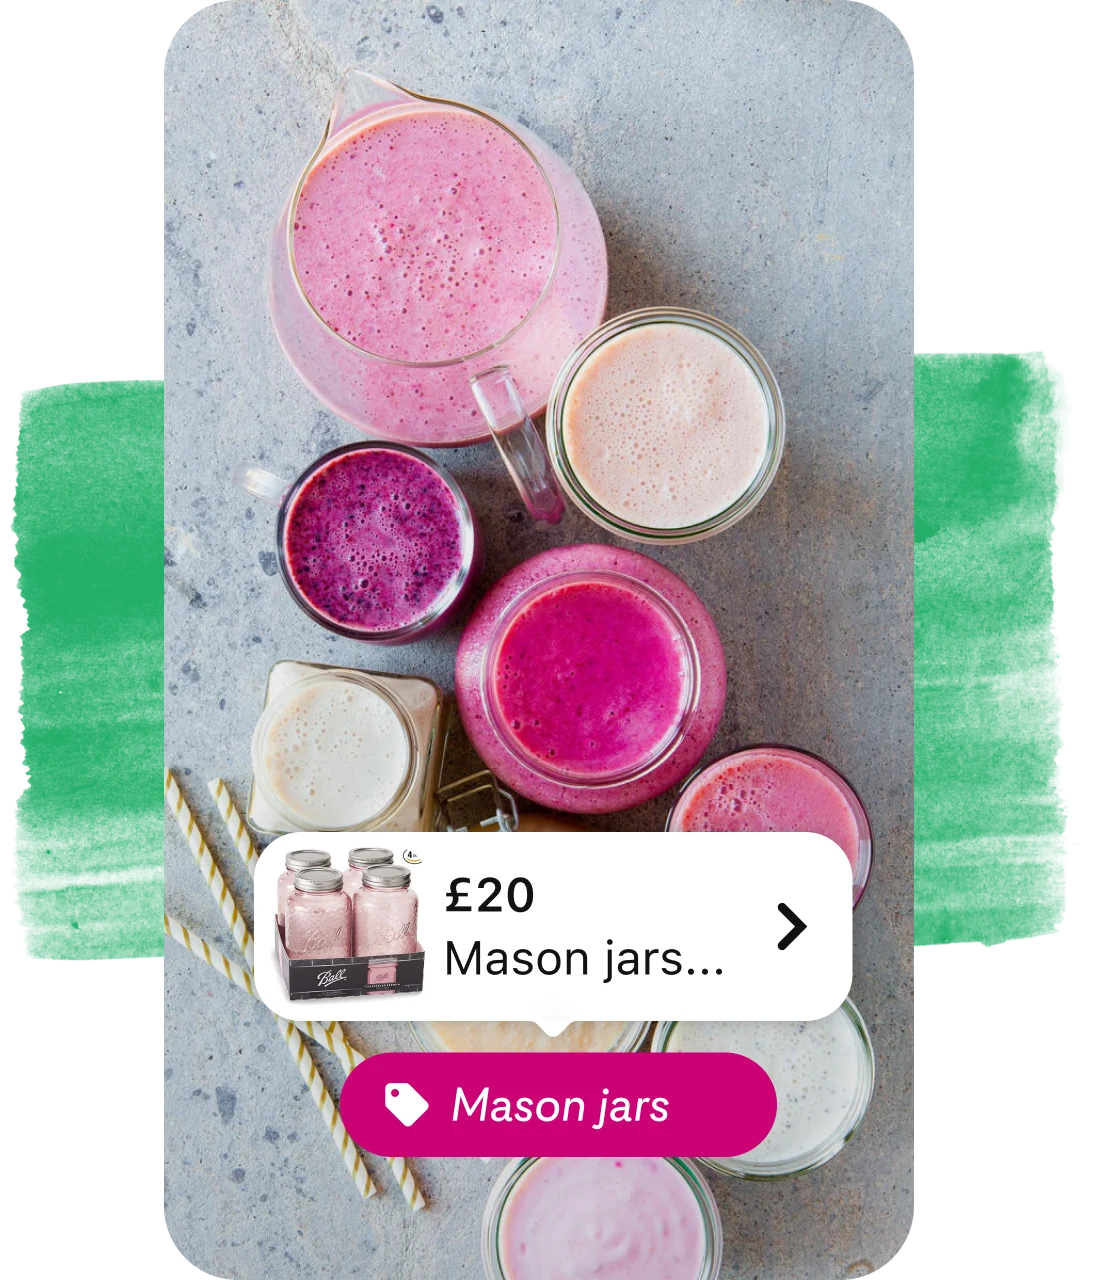 Shopping tag for mason jars overlaid on Pin of juice in glasses